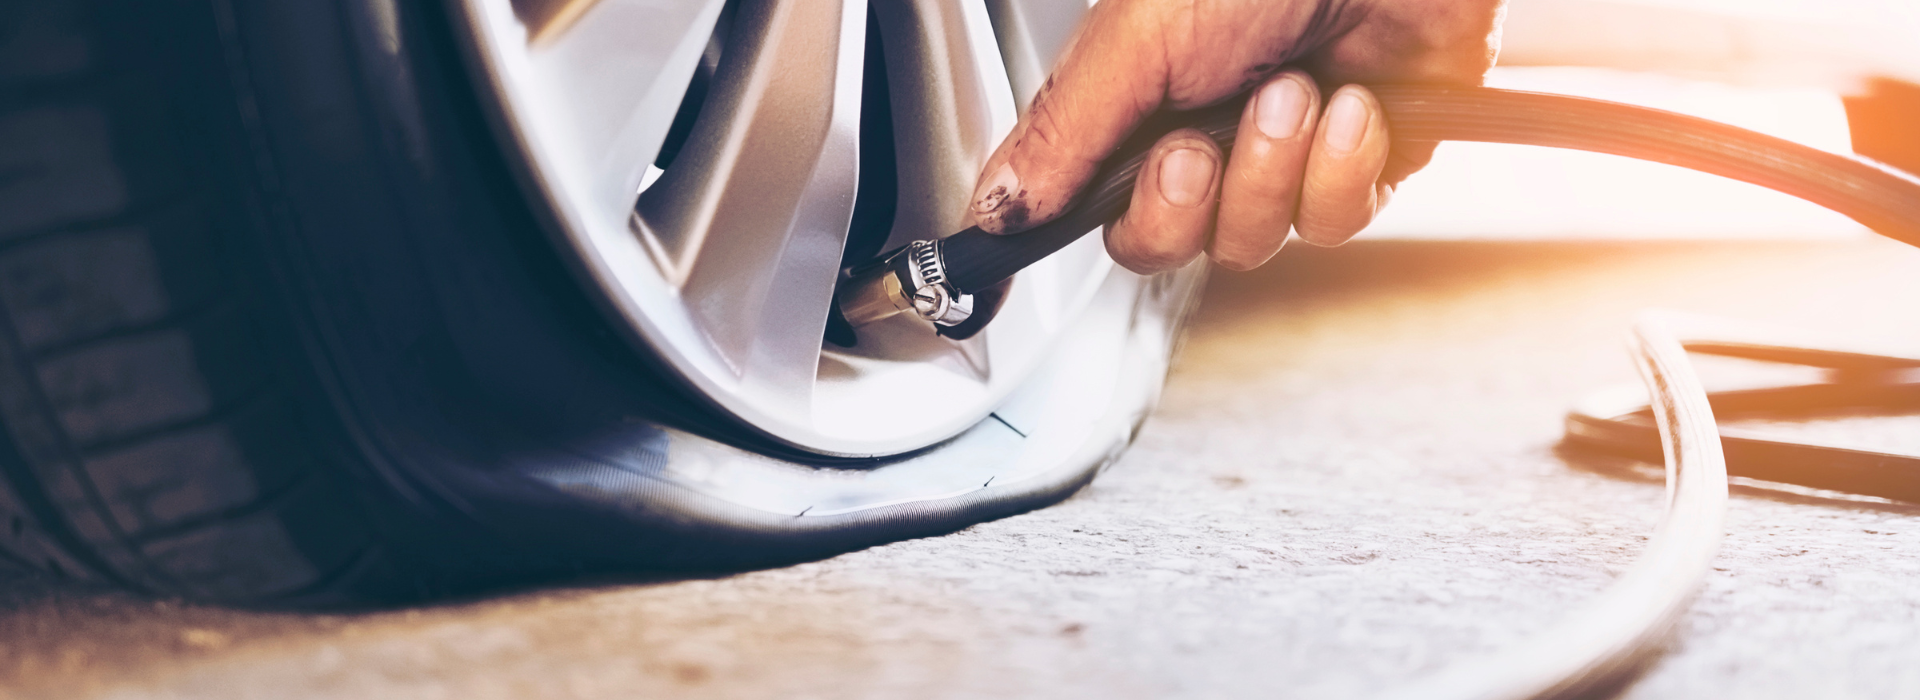 Understanding Tire Repair: When and How to Do It Safely